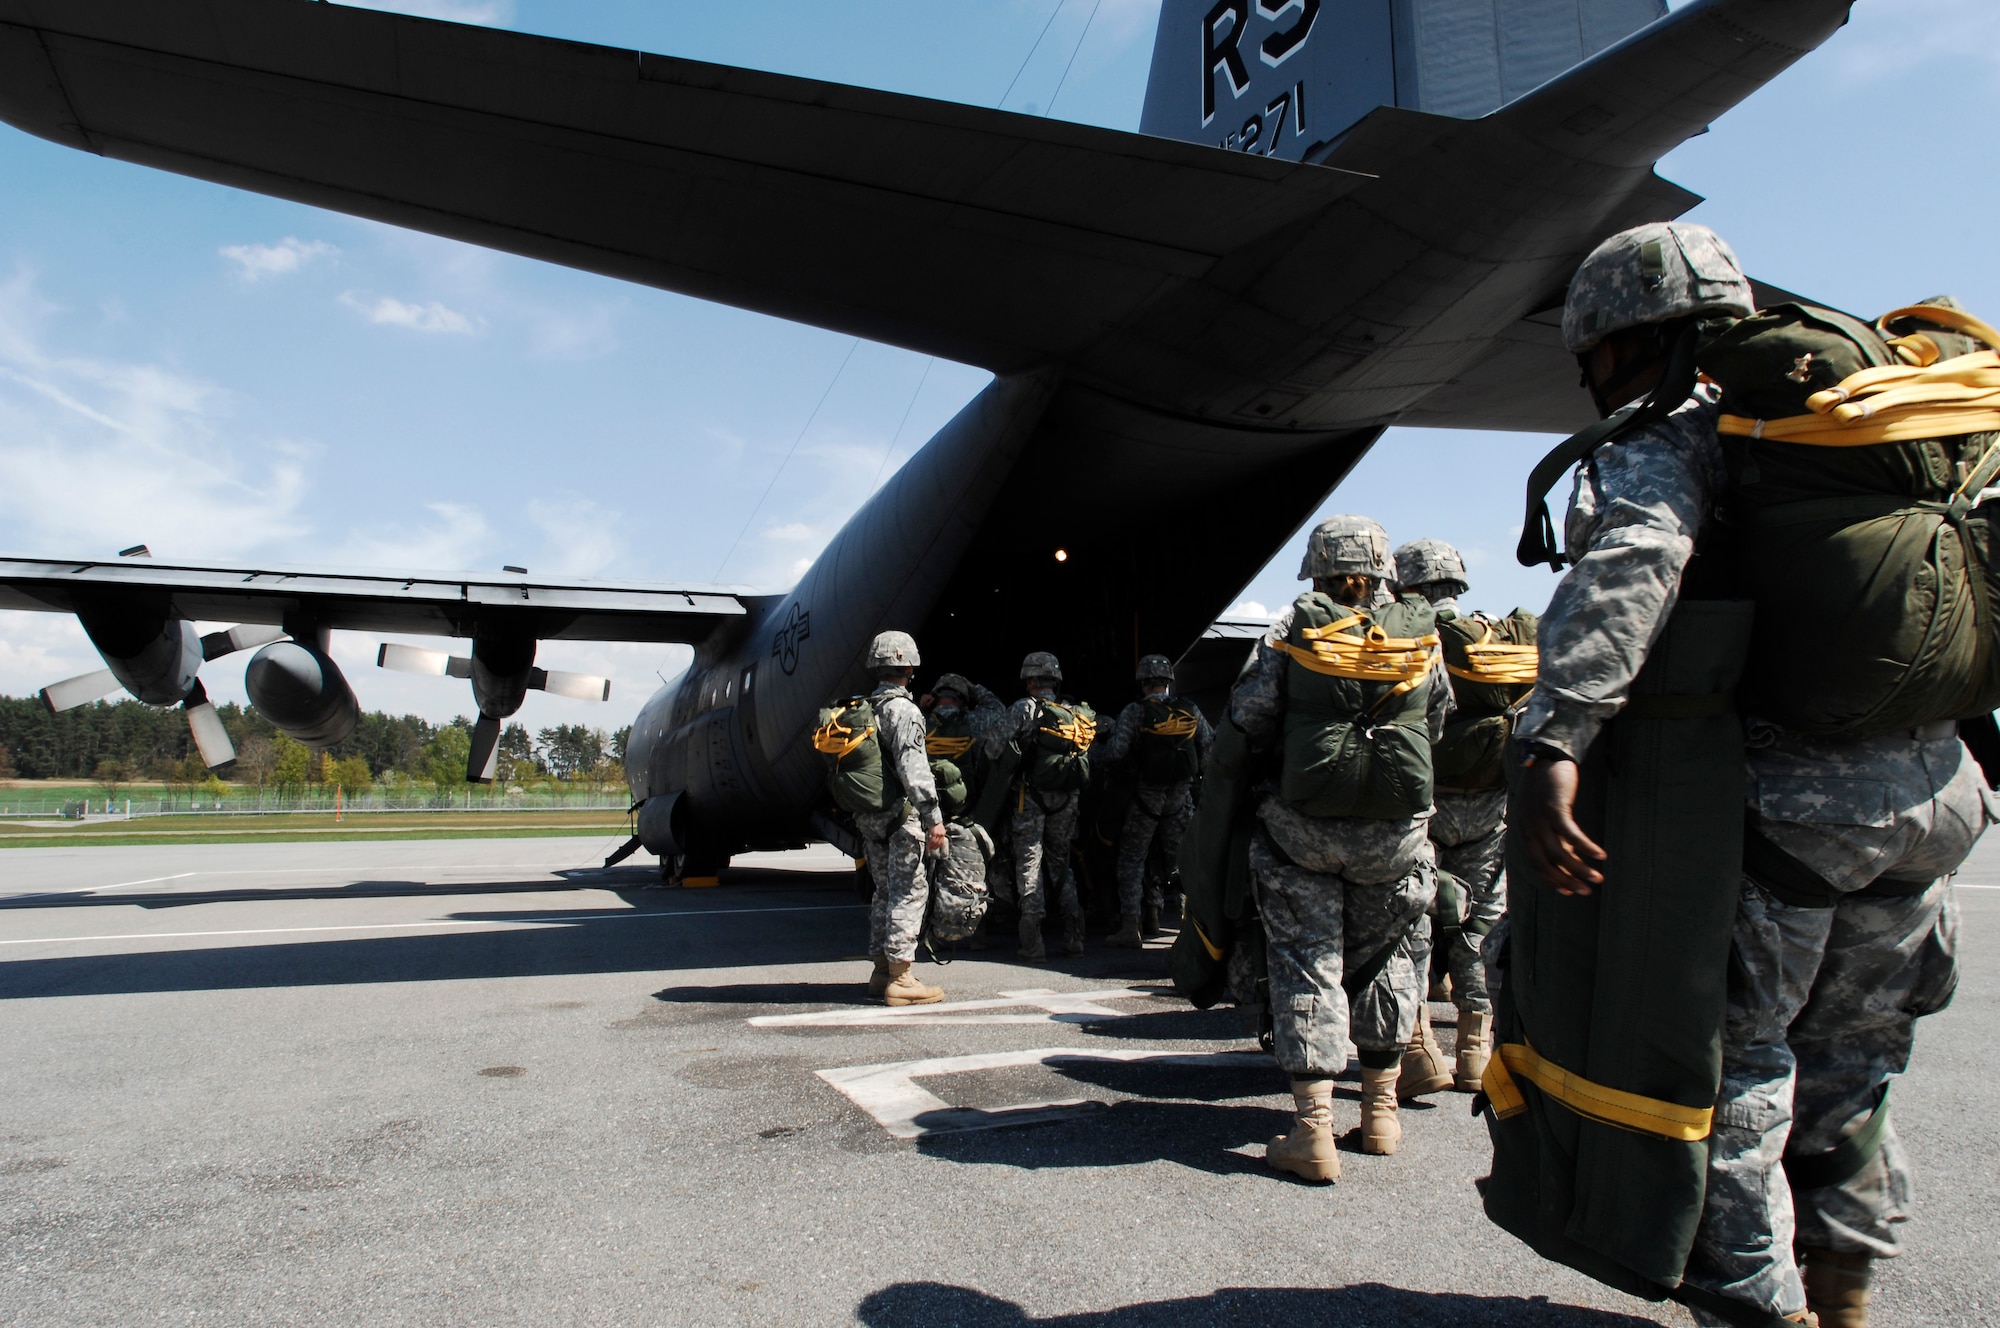 Members from the 173rd Airborne Brigade Combat Team board a C-130E Hercules aircraft for their quarterly training jump in Grafenwoehr Army Airfield, Germany, April 22, 2009. The 173rd ABCT has a proud history of service with combat jumps in Vietnam and Iraq during the first days of Operation Iraqi Freedom. (U.S. Air Force photo by Senior Airman Amber Bressler)